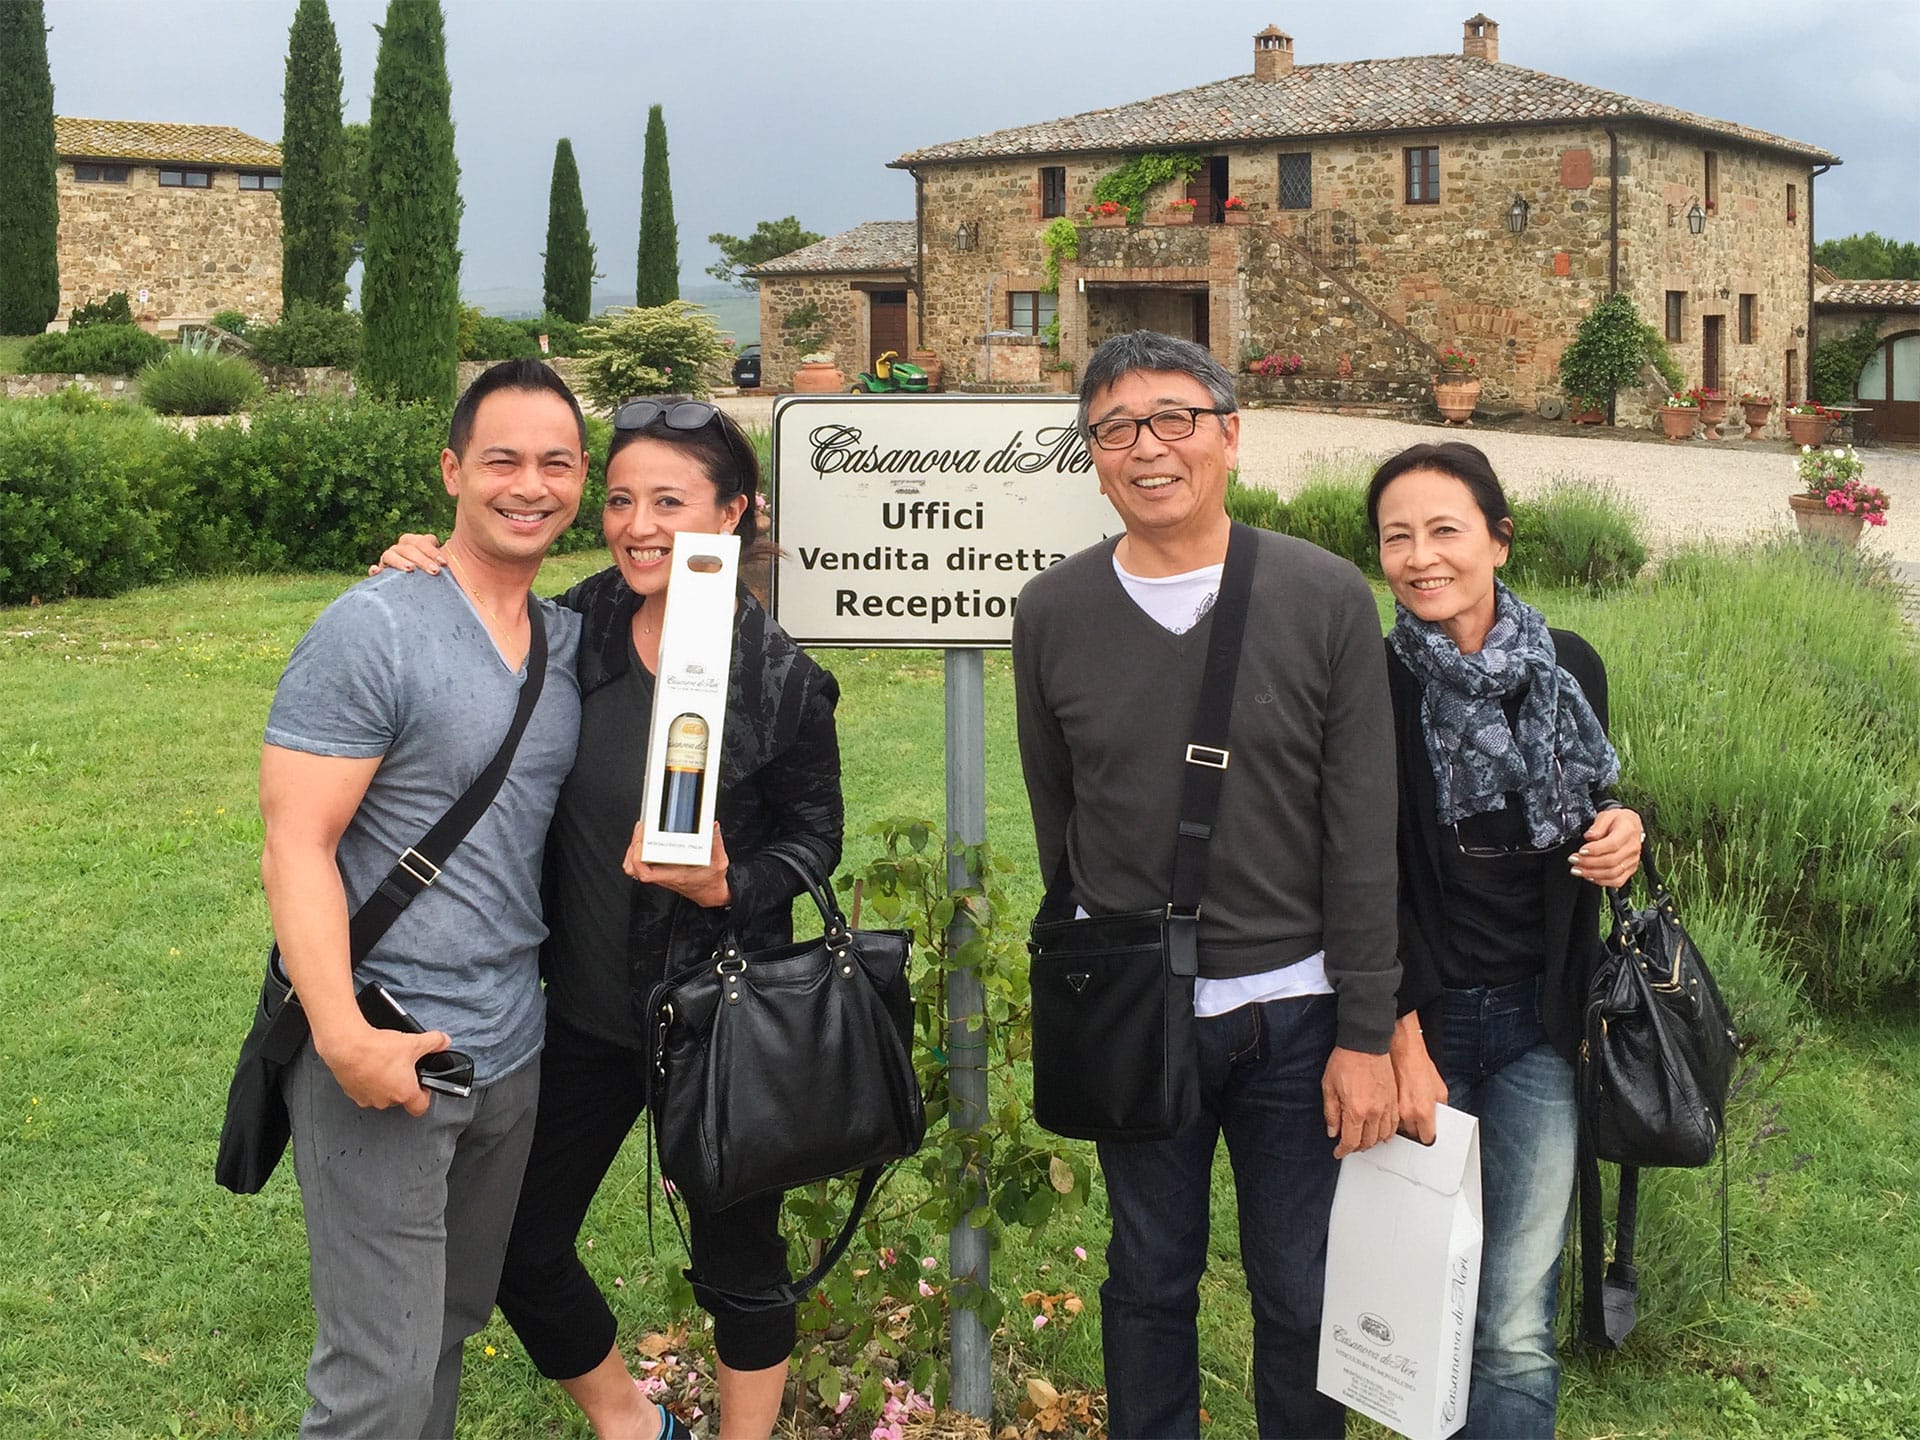 Cortona wine tour photos and images | Pictures of wine and truffle tours in Tuscany and Umbria